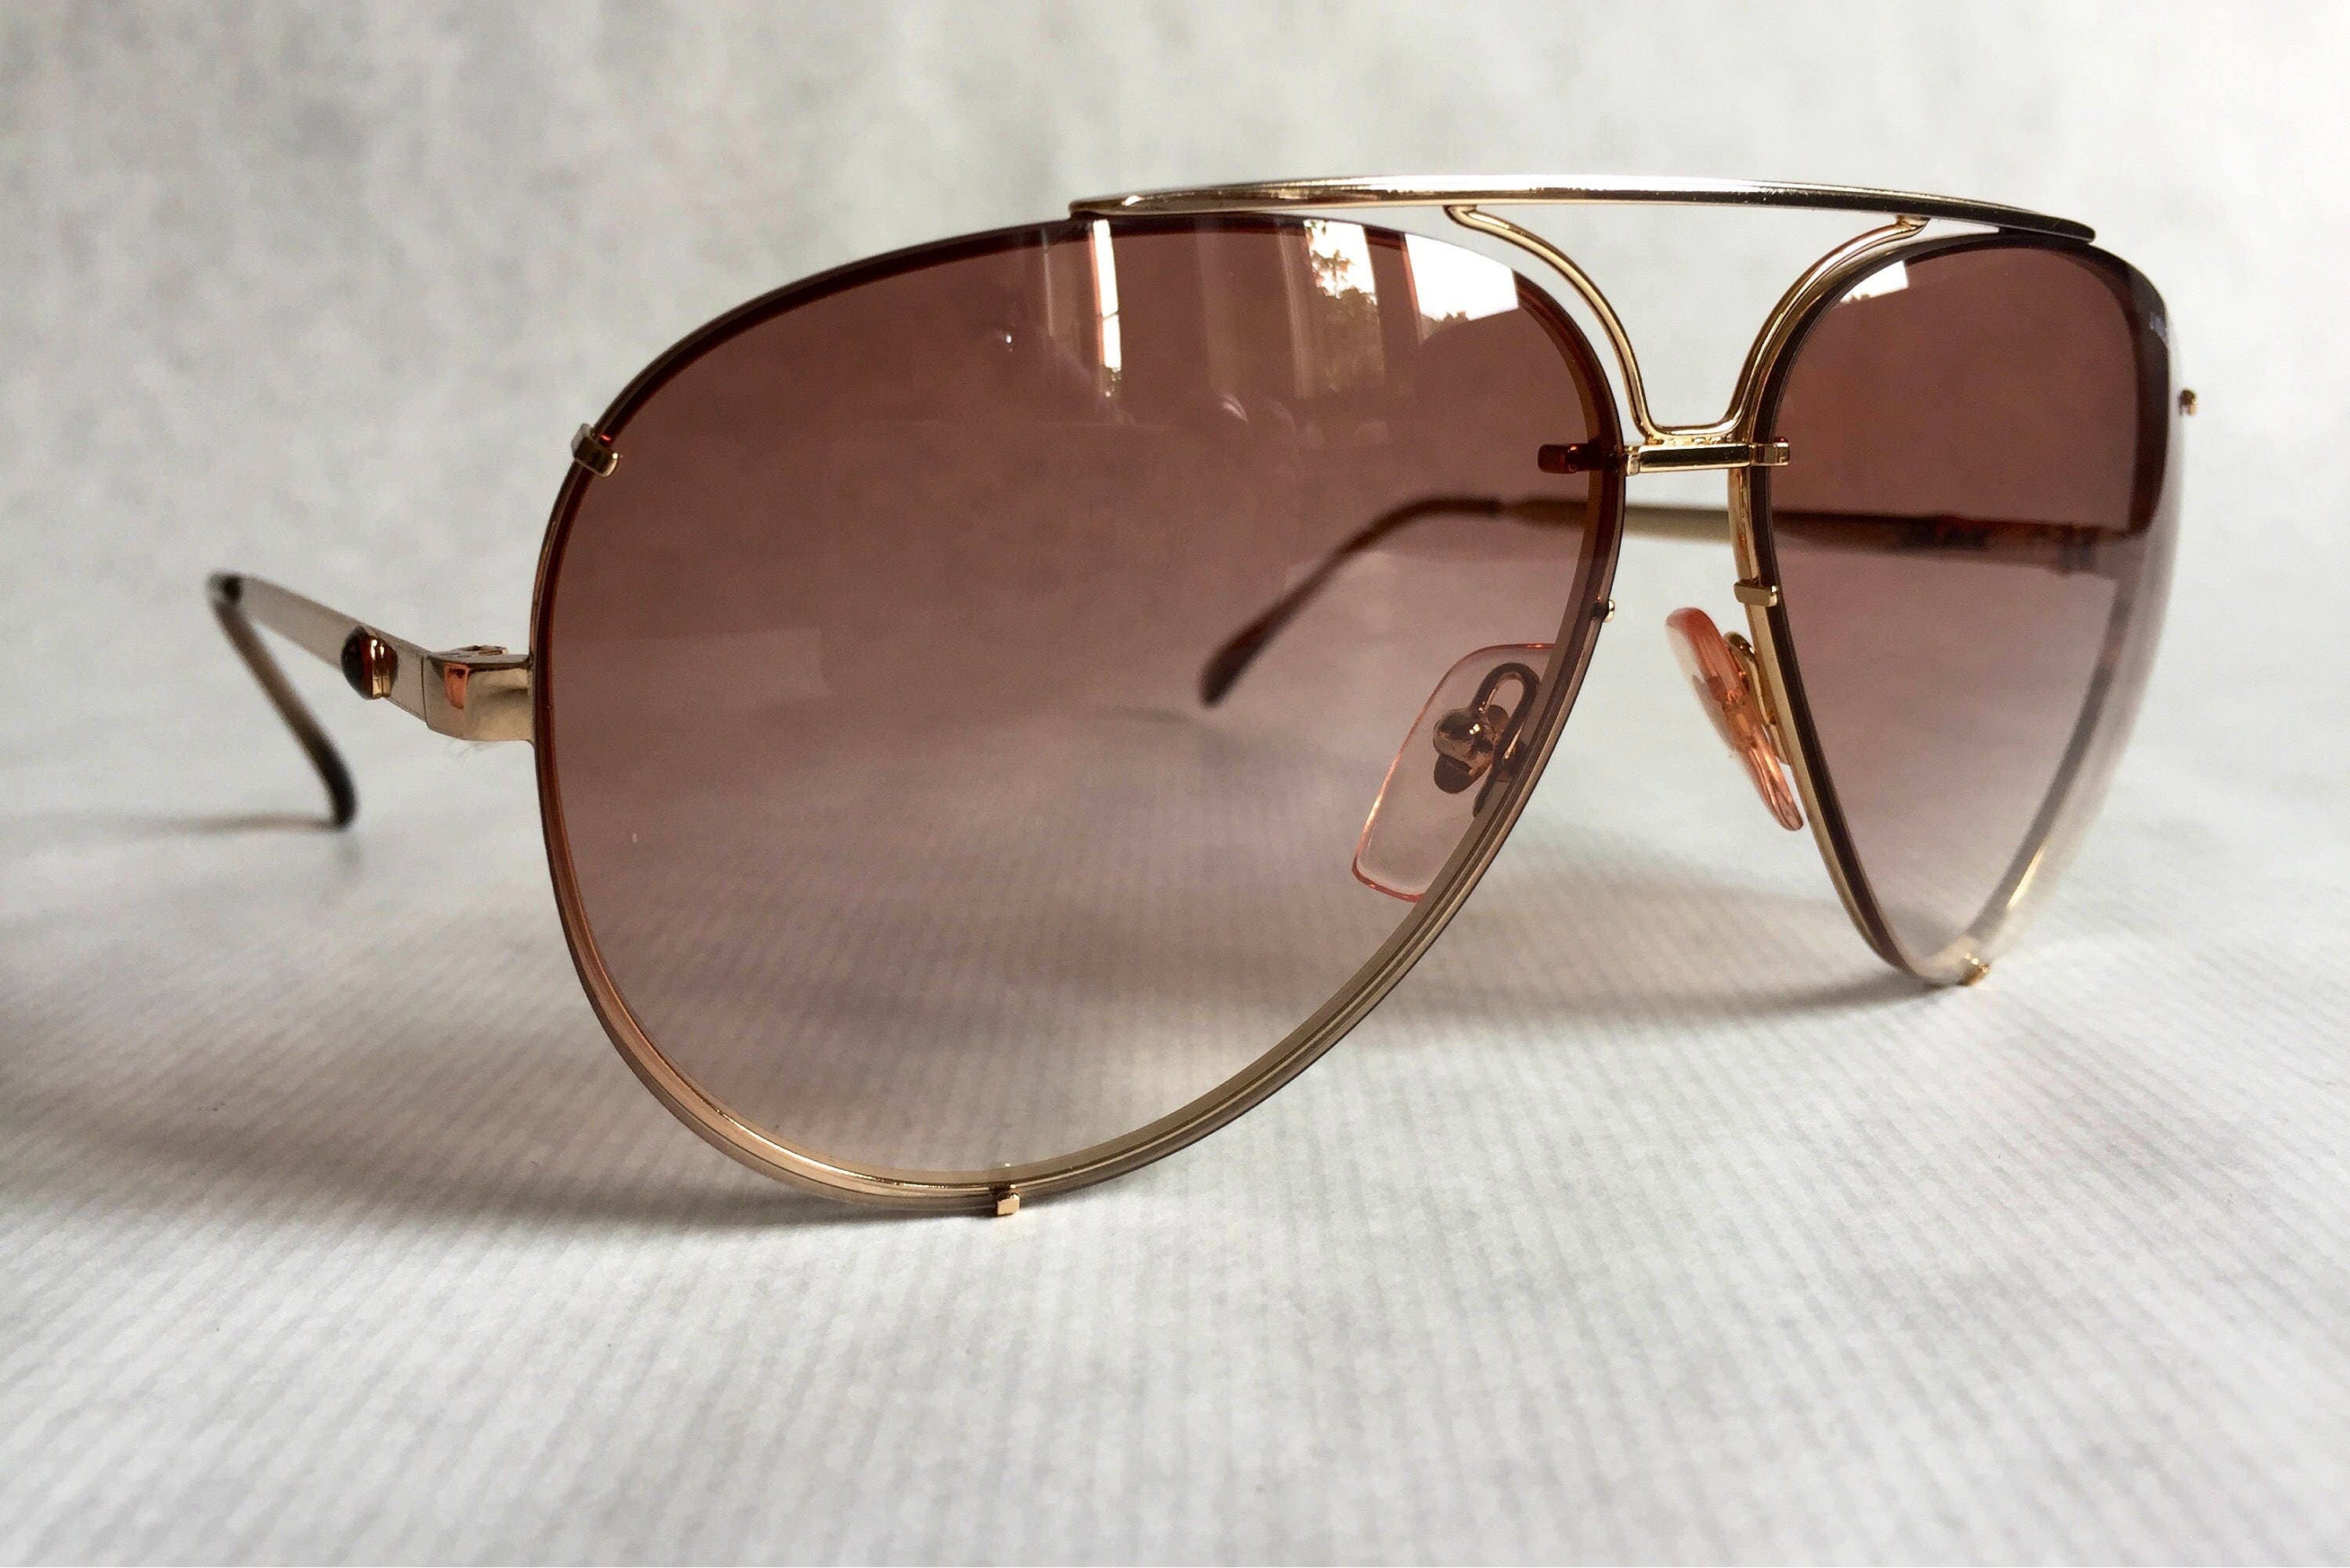 Reserved for Lucy Safrazian /// Julio Iglesias 892 Vintage Sunglasses ...